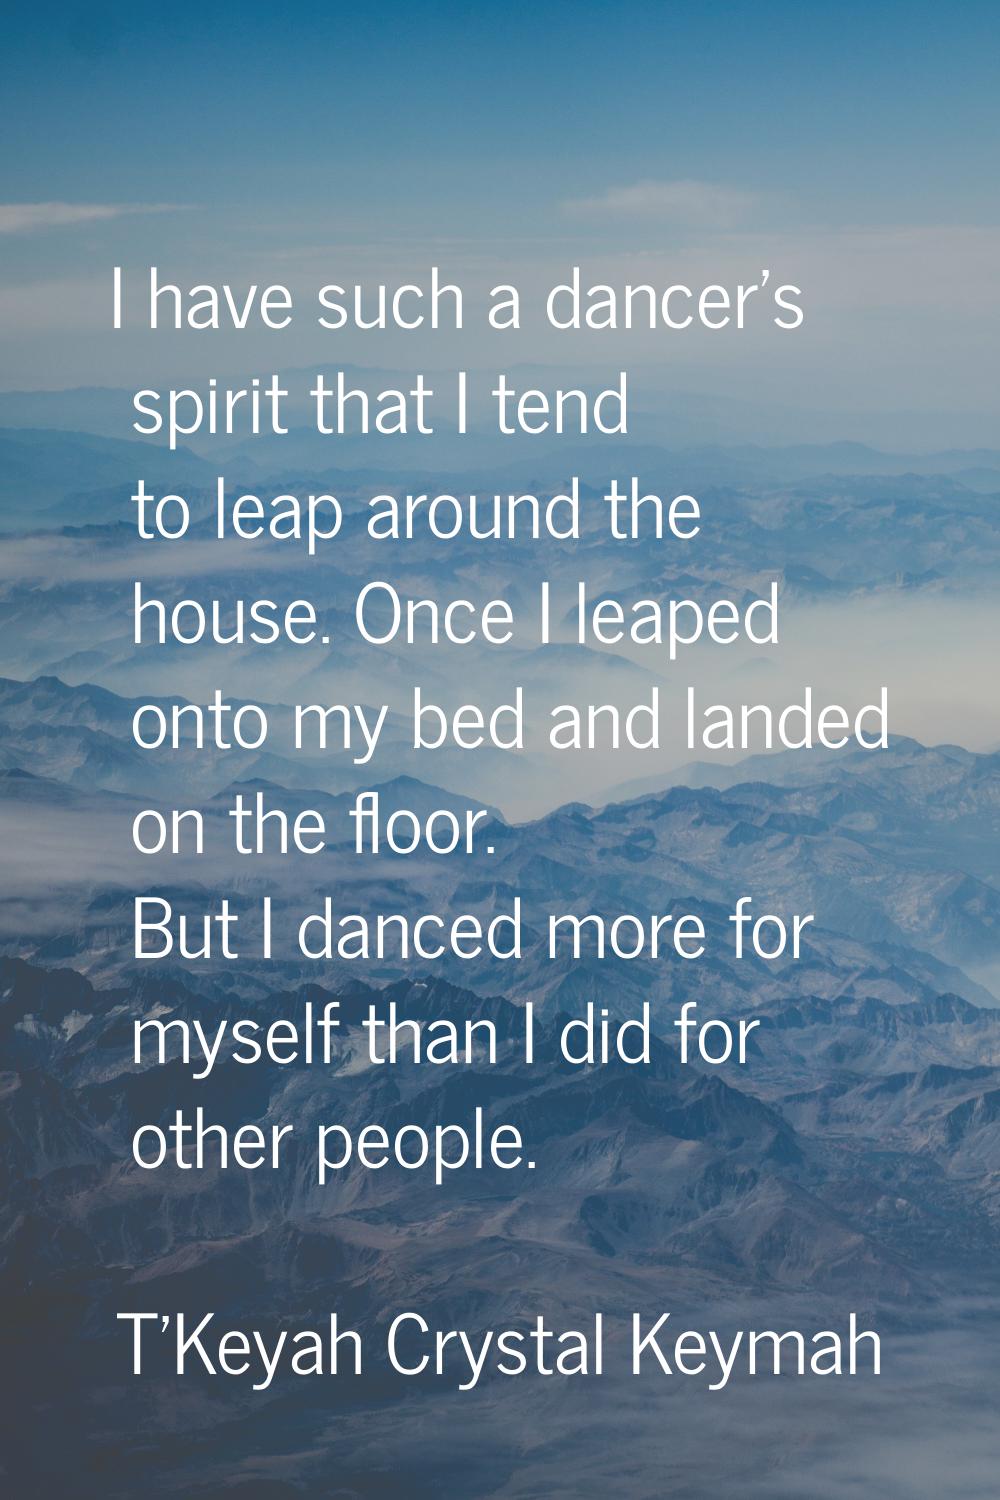 I have such a dancer's spirit that I tend to leap around the house. Once I leaped onto my bed and l